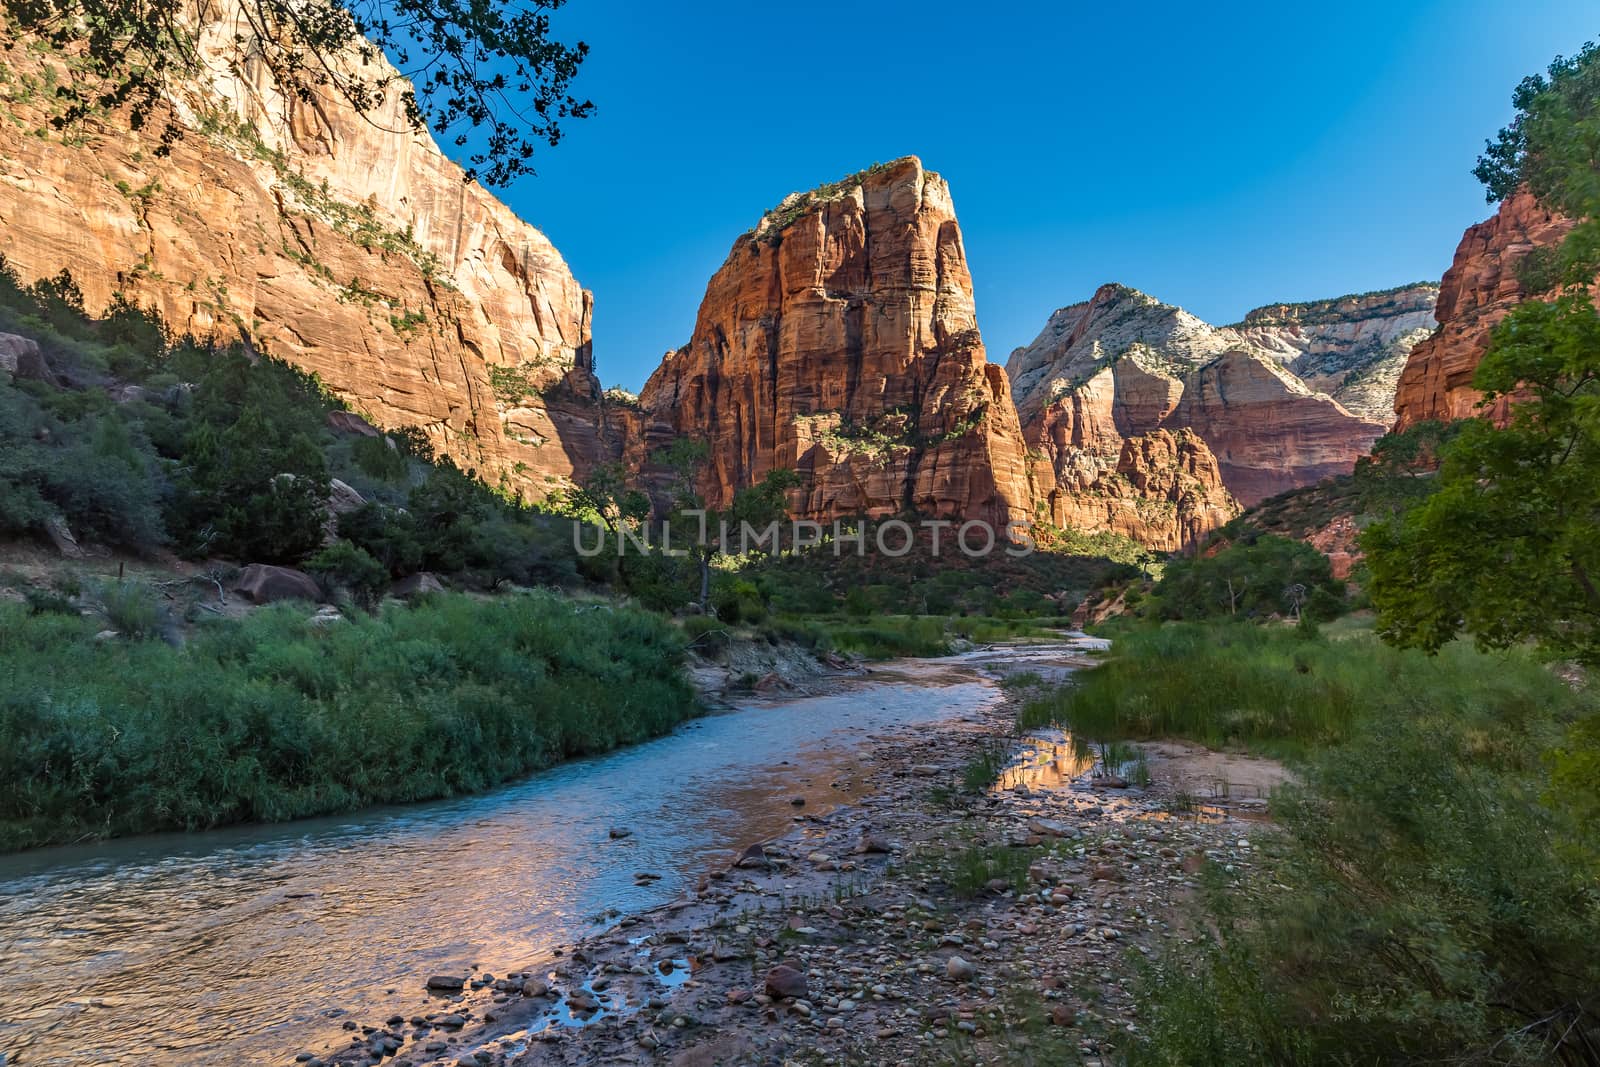 The Virgin River winds through the floor of Refrigerator Canyon at Zion National Park in Utah